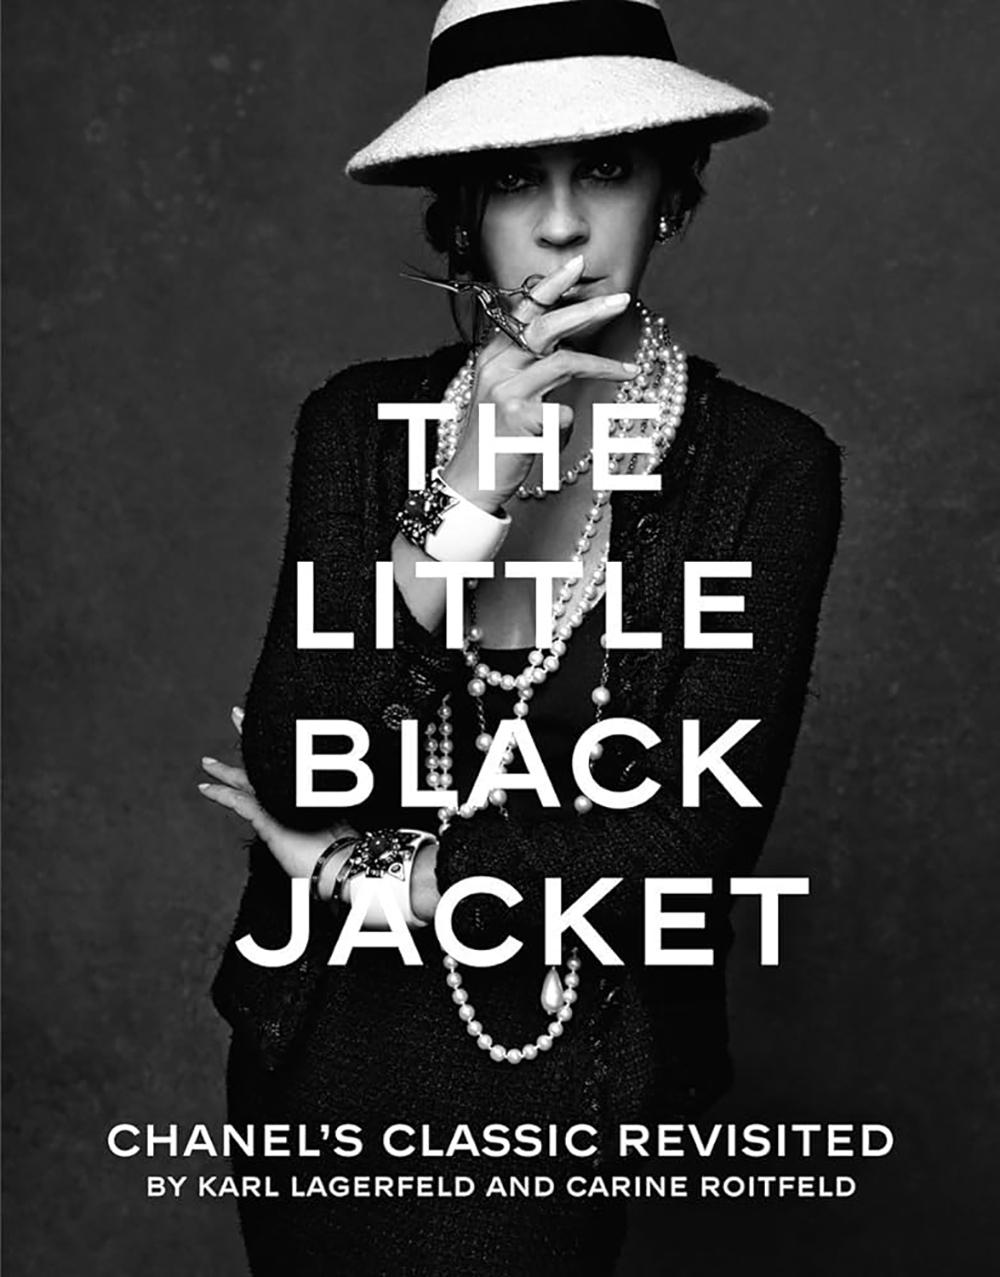 The most iconic Chanel little black dress -- from the photo book ''Chanel: little black jacket'' - as captured on many celebs
- From 2011 Cruise Collection, the most sought after dress by Chanel, 11C
- CC logo charm at side
- black silk lining
Size